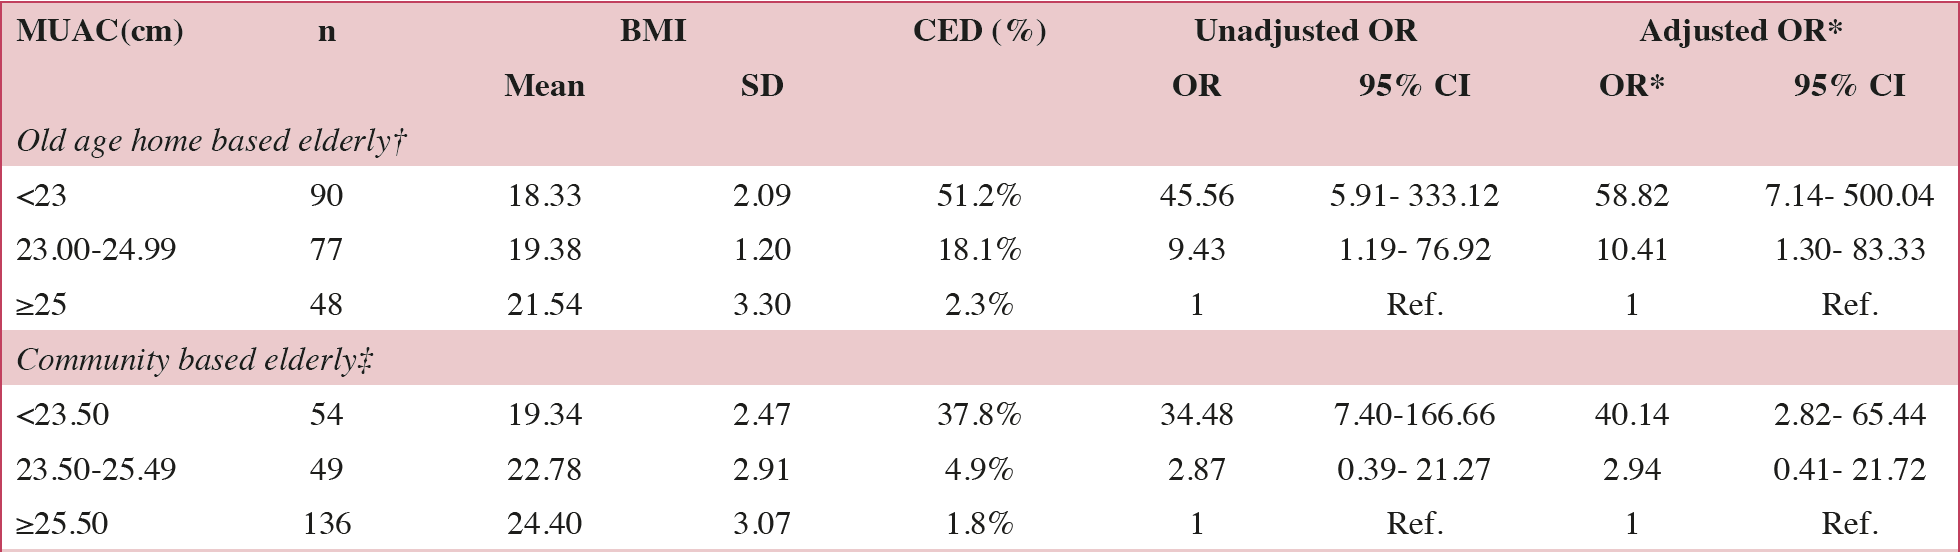 Table 5. Prevalence of CED and mean BMI according to the category of MUAC among the old age home and community based elderly participants.